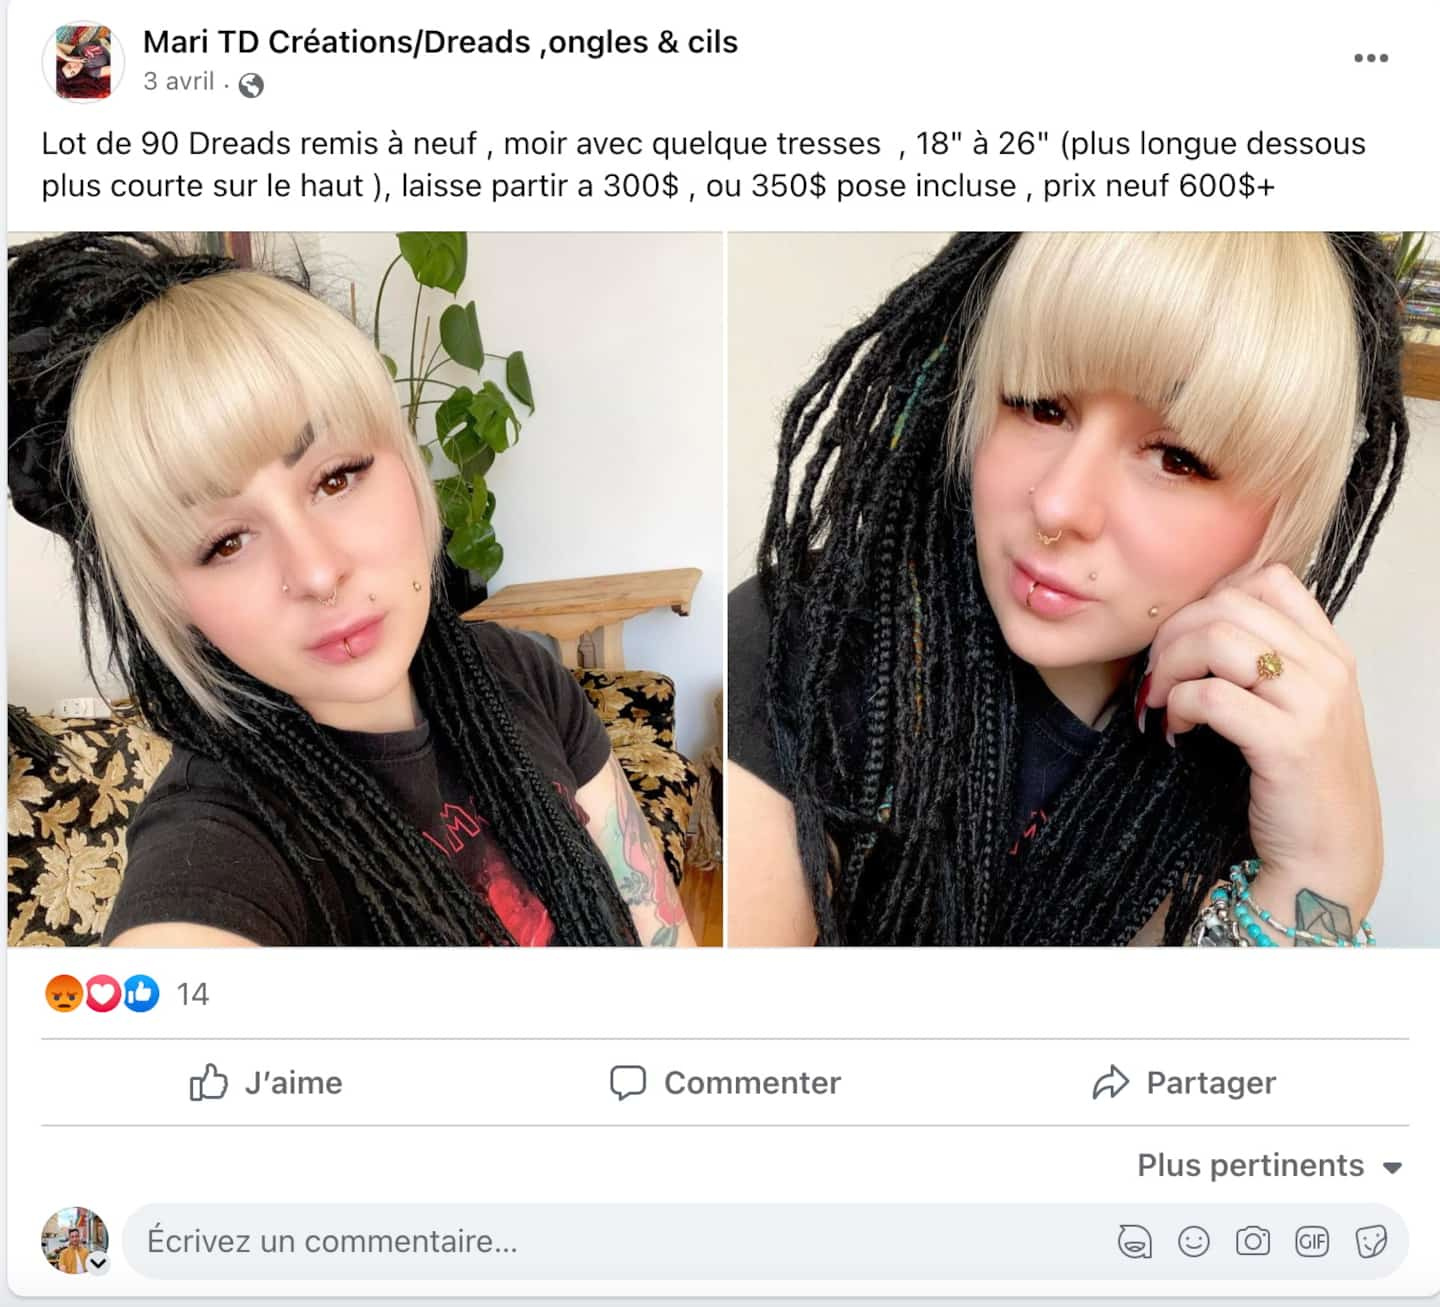 Quebec women say they were cheated by a hair saleswoman